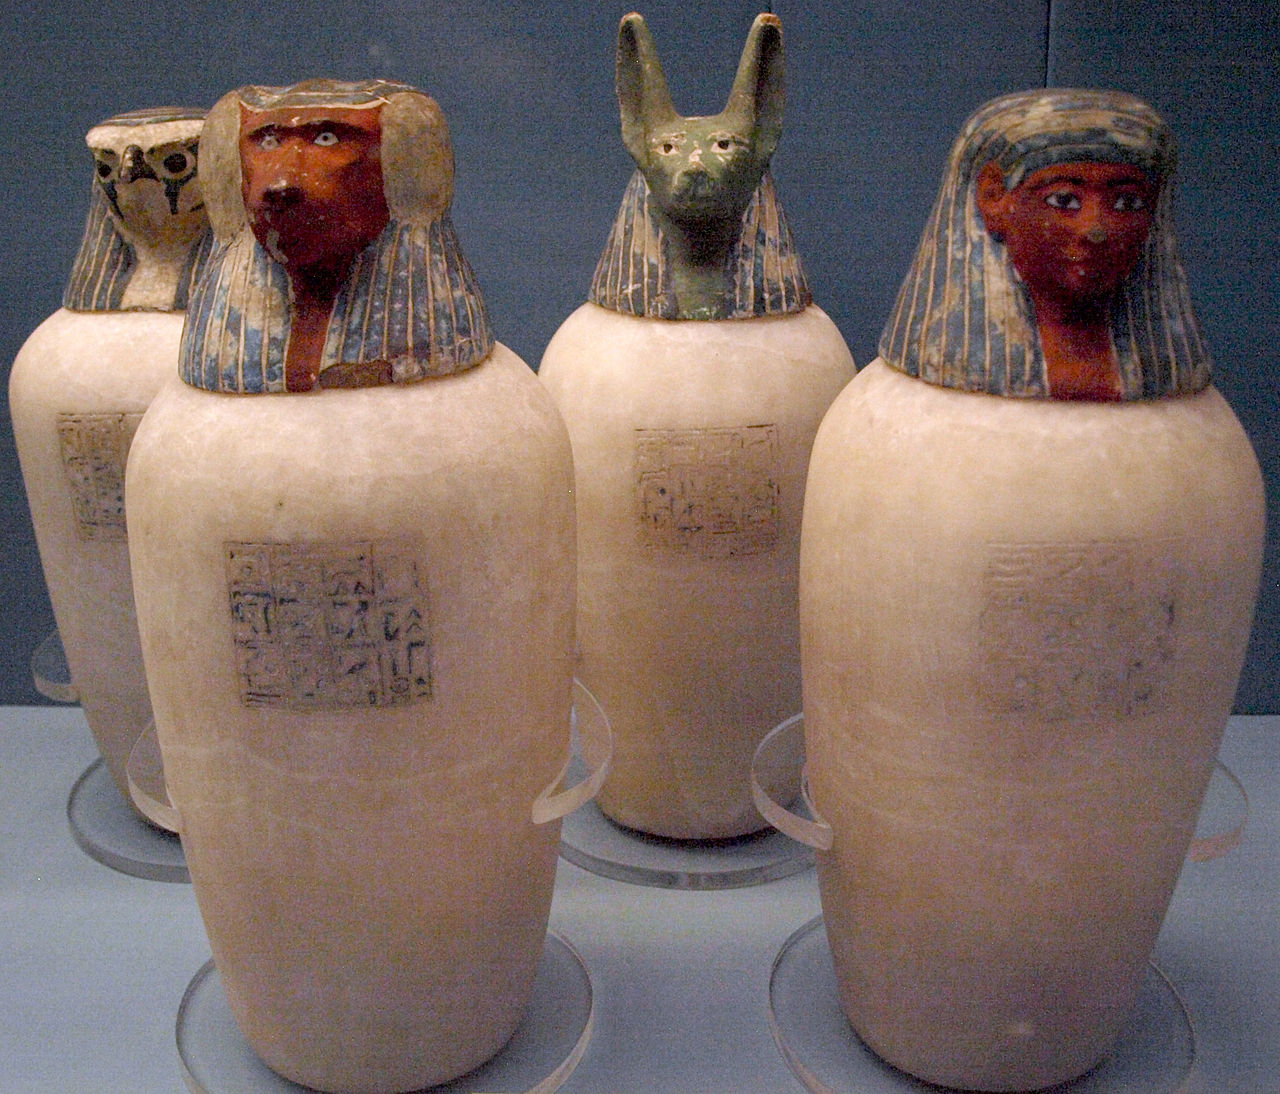 4 Canopic Jars with Inscriptions